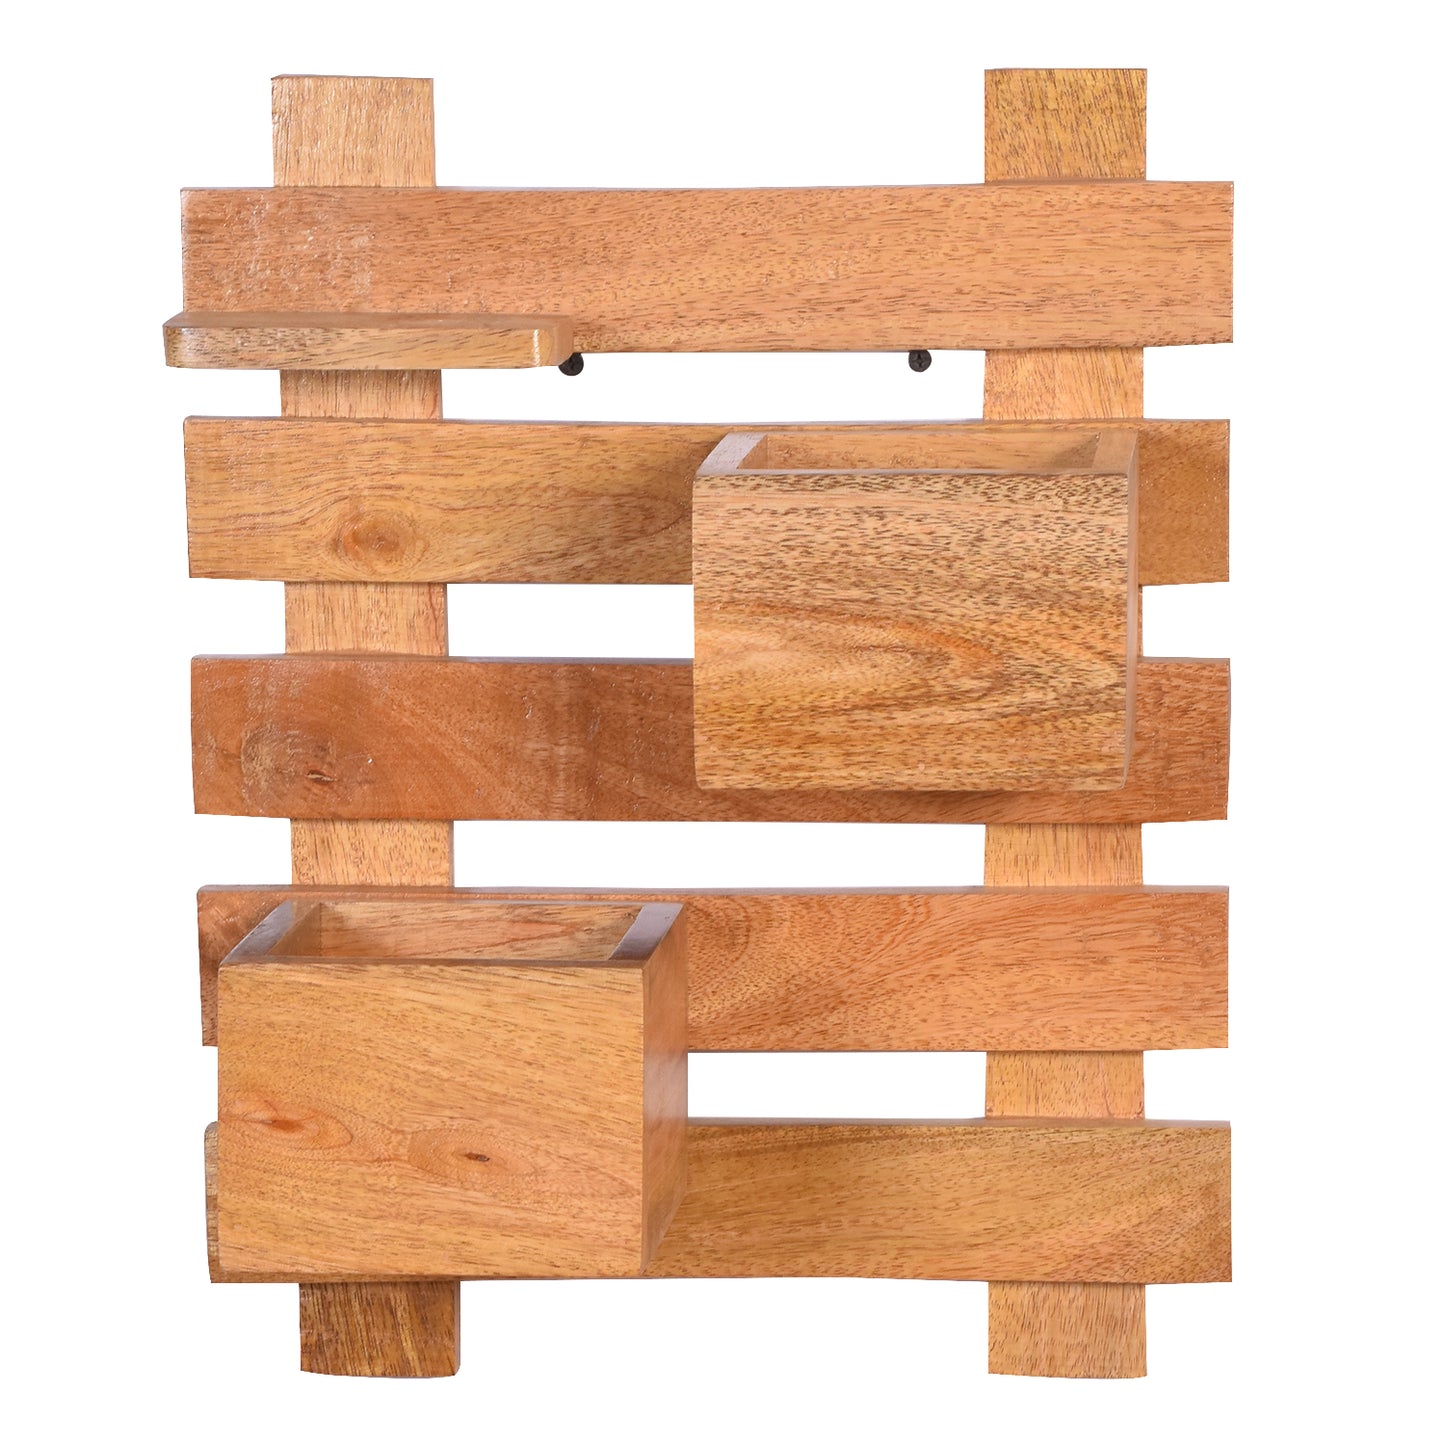 The Weaver's Nest Wooden Wall Planter Stand